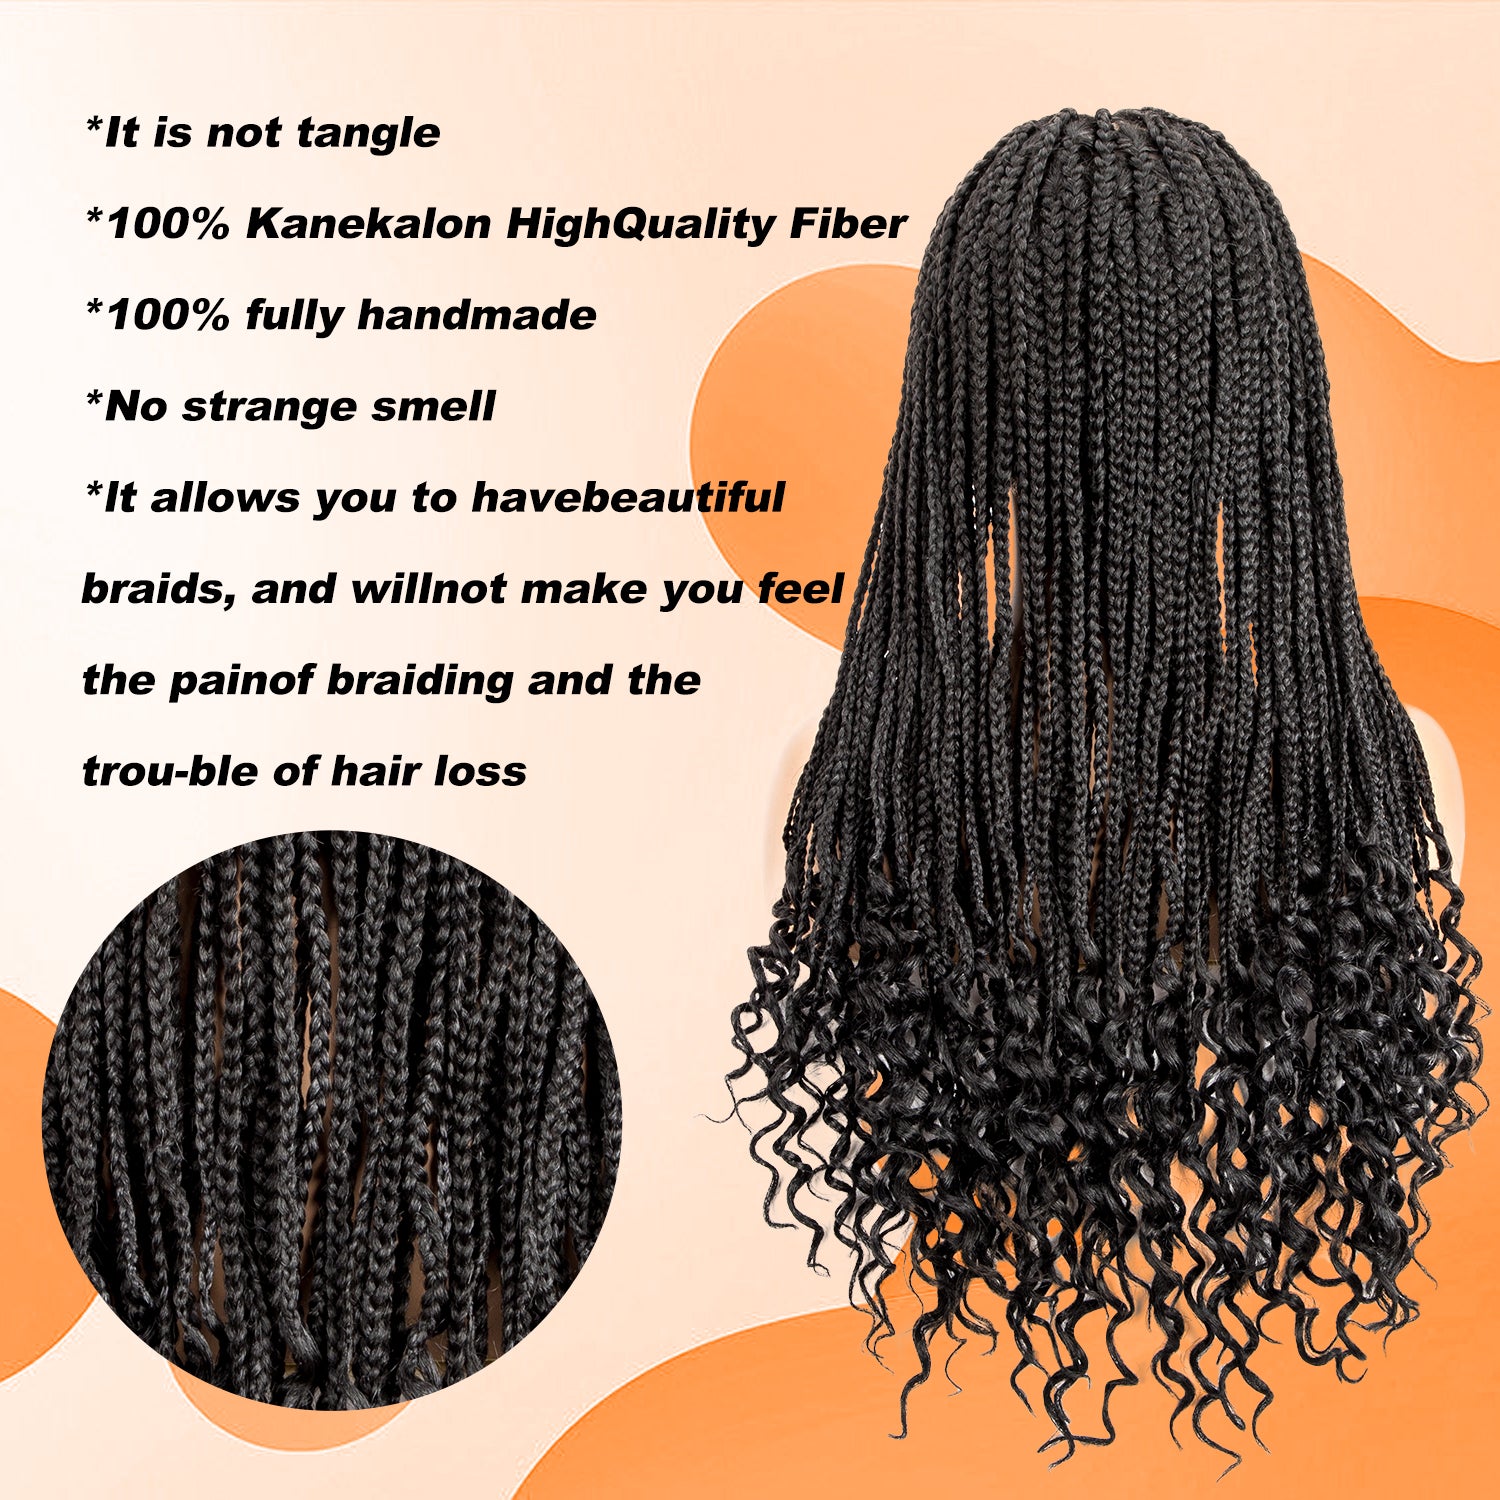 28 Inch 13x6 Lace Braided Wig with Boho Curly Ends, Square Knotless Box Braid Wig for Black Women,Synthetic Braided Curly Braids Wig with Baby Hair